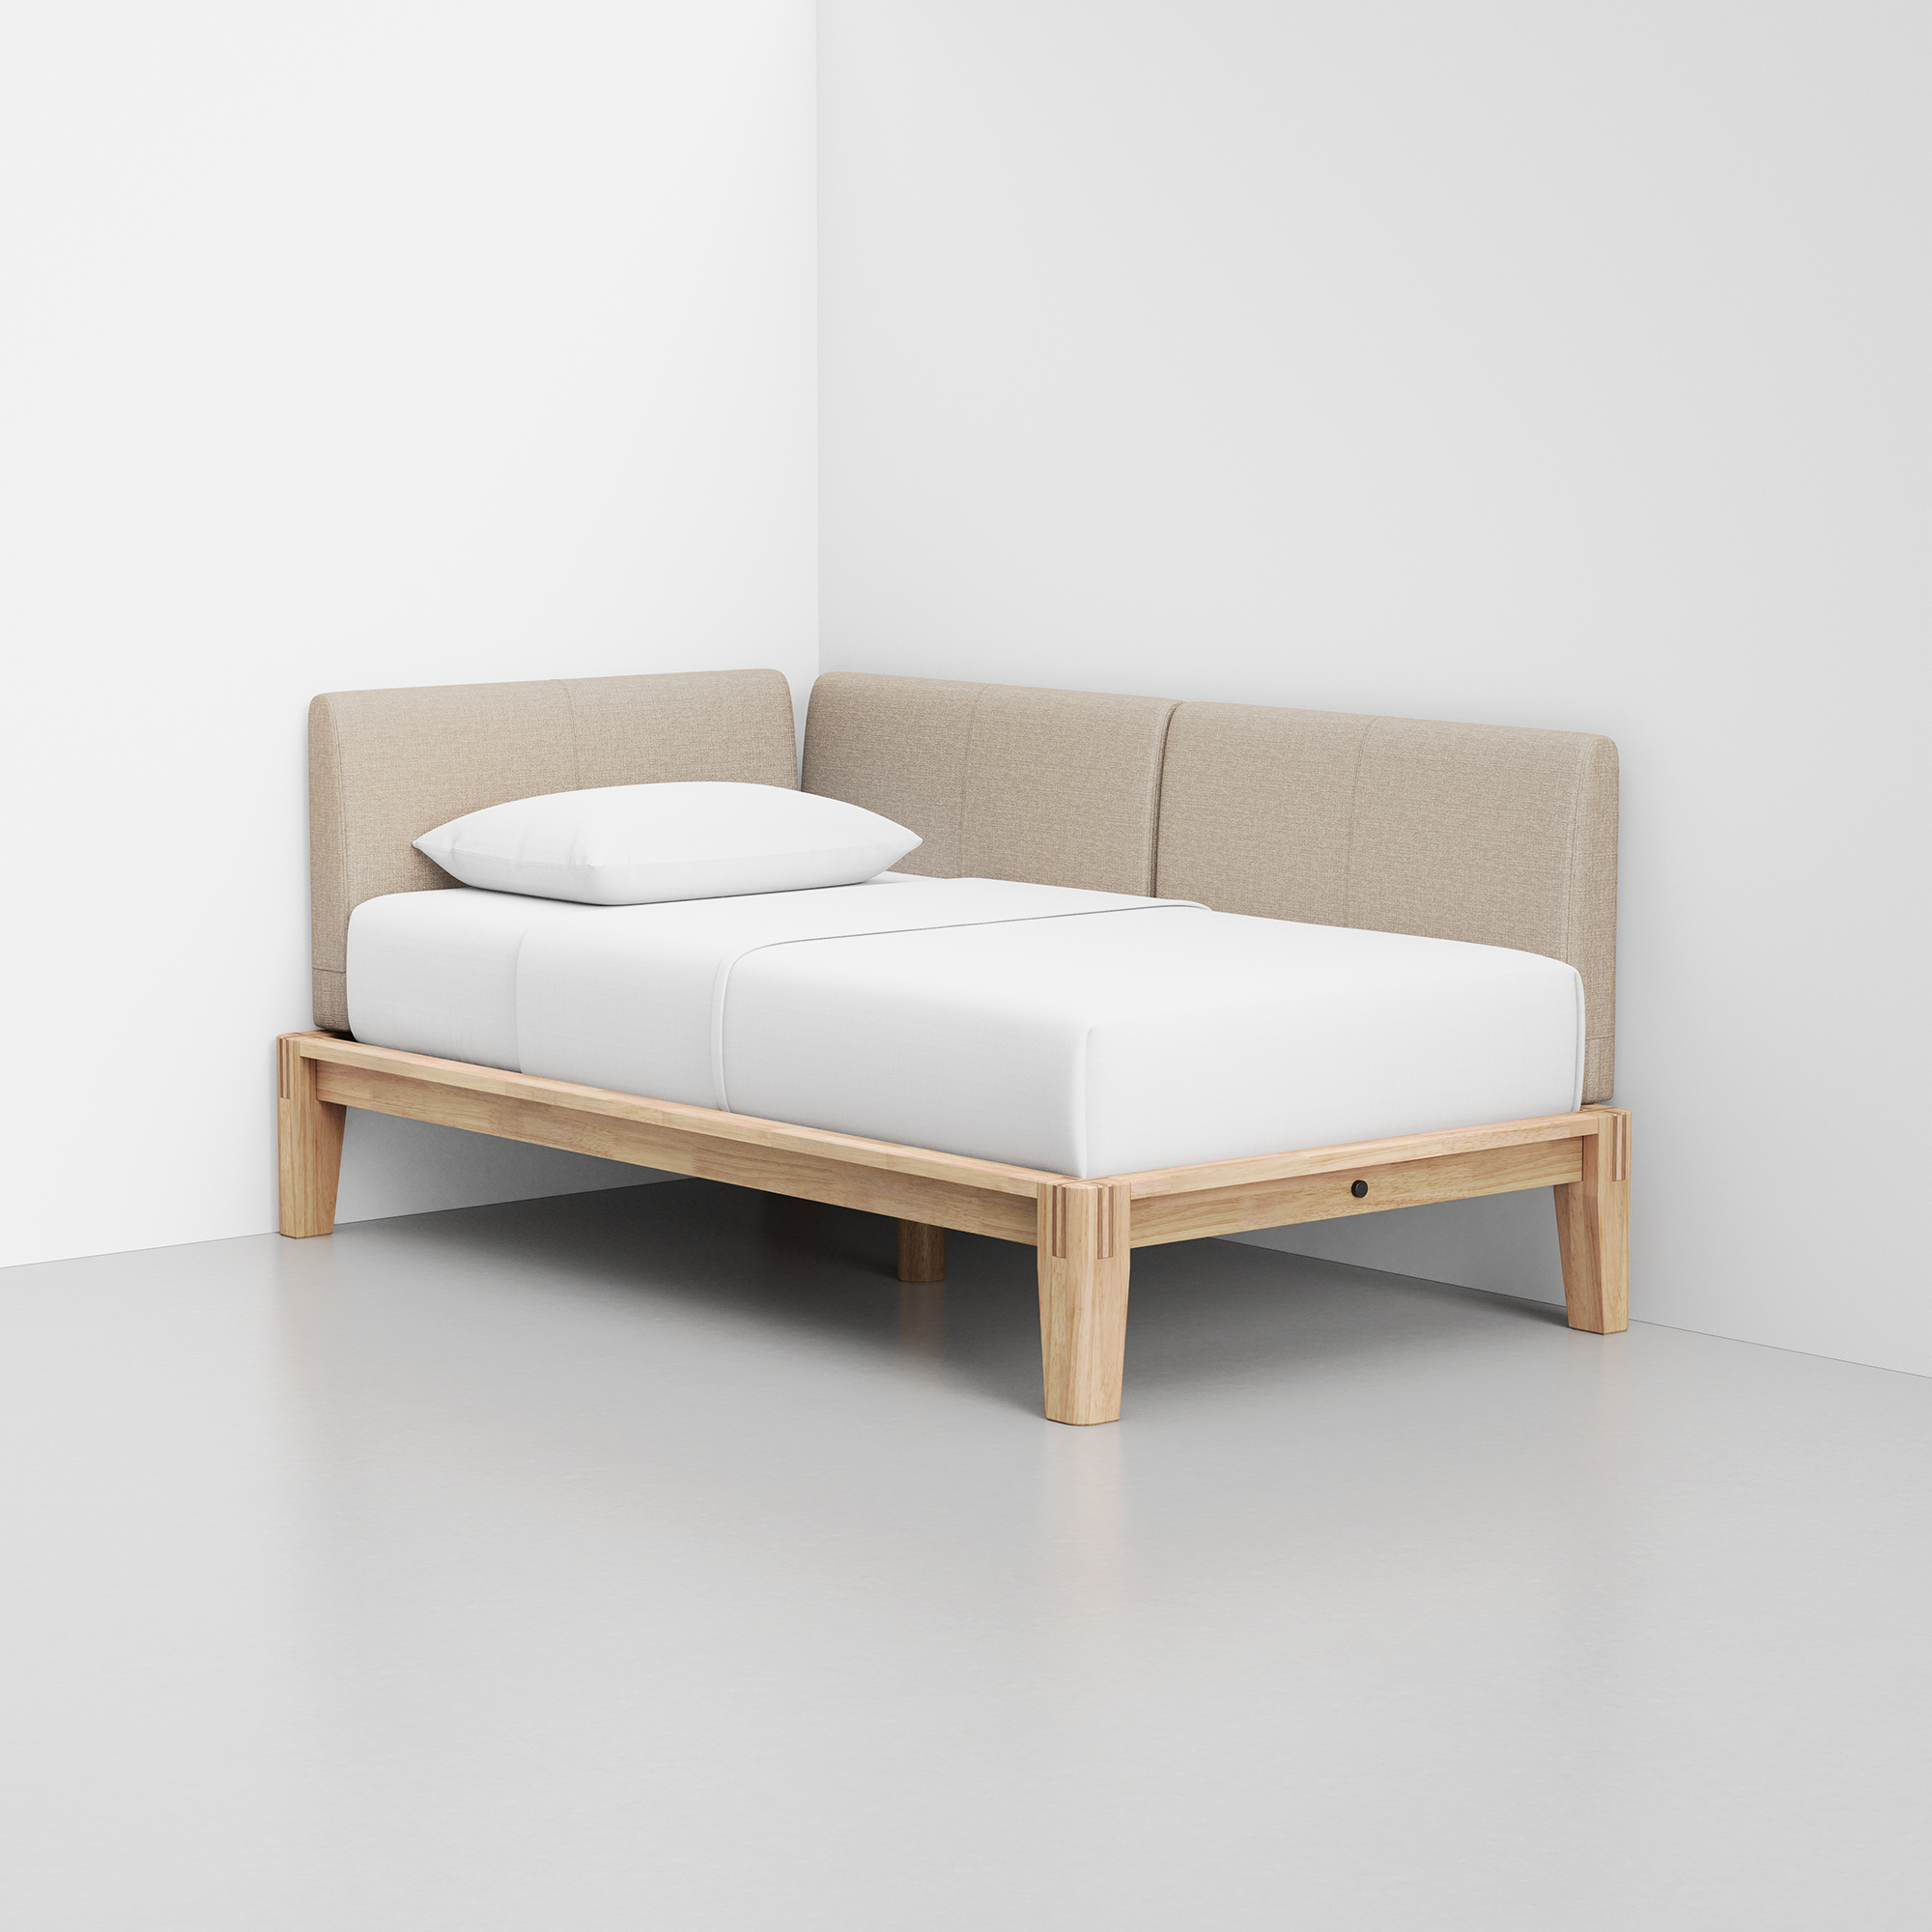 PDP Image: The Daybed (Natural / Dune) - Rendering - Front